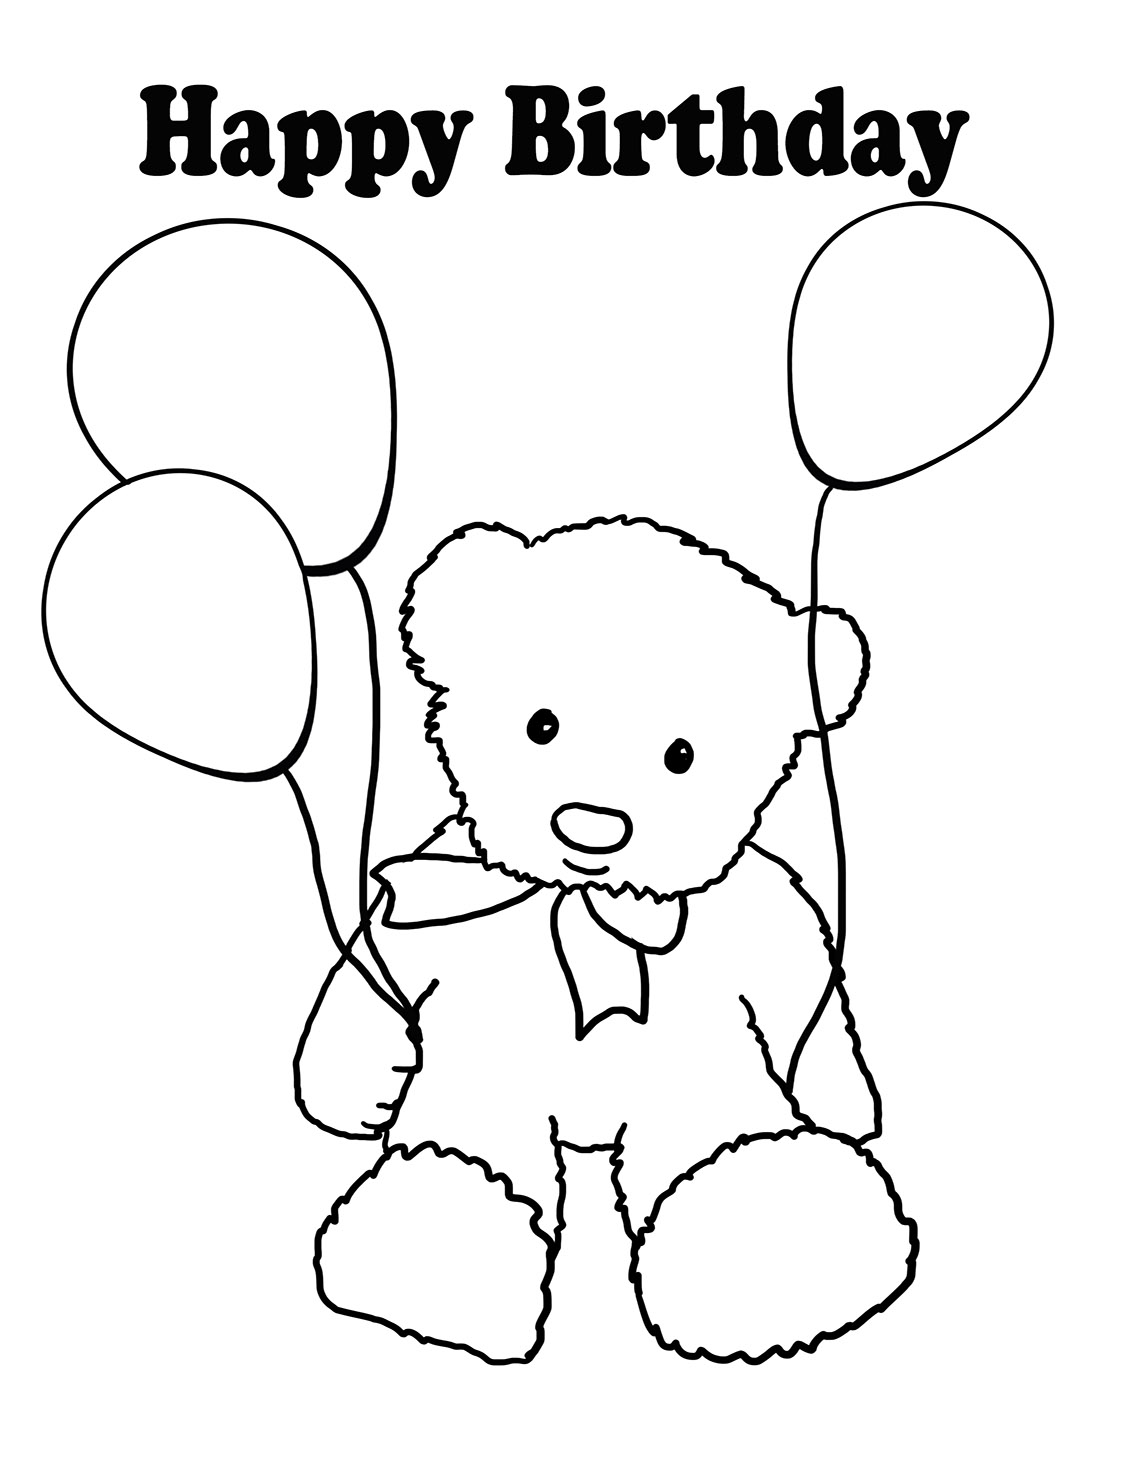 Download Balloon Coloring Pages - Best Coloring Pages For Kids